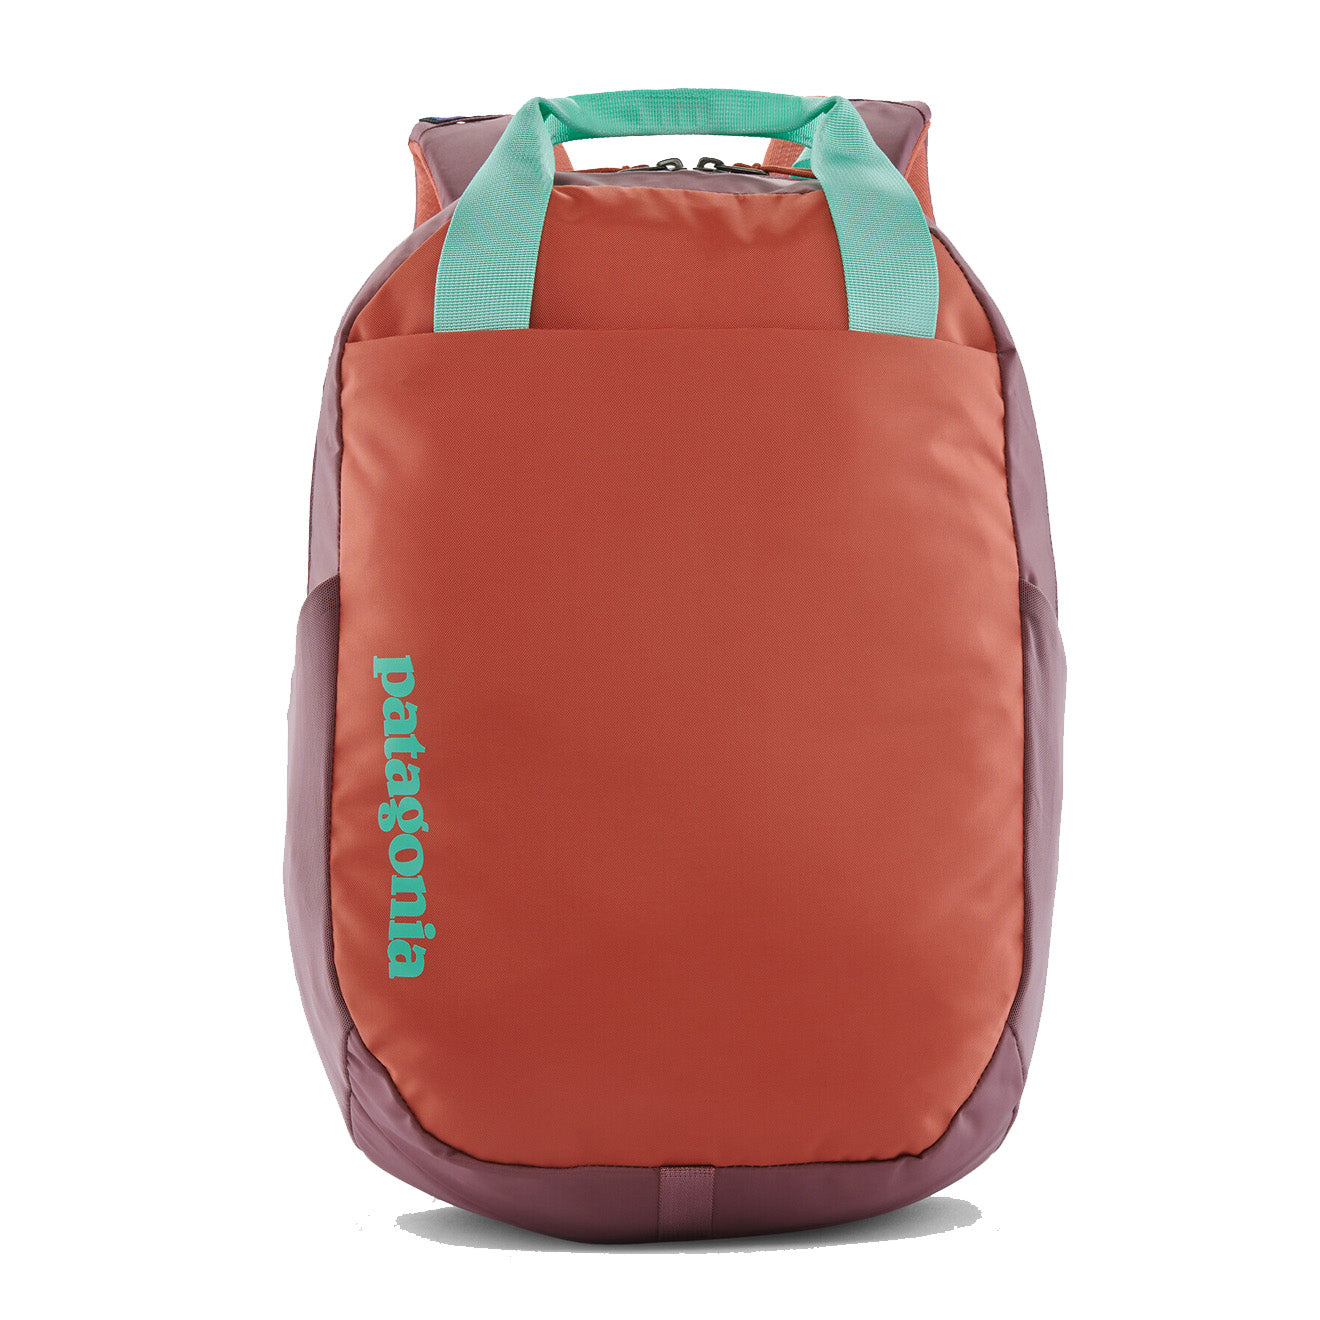 Patagonia Atom Tote Pack 20L Evening Mauve - The Sporting Lodge